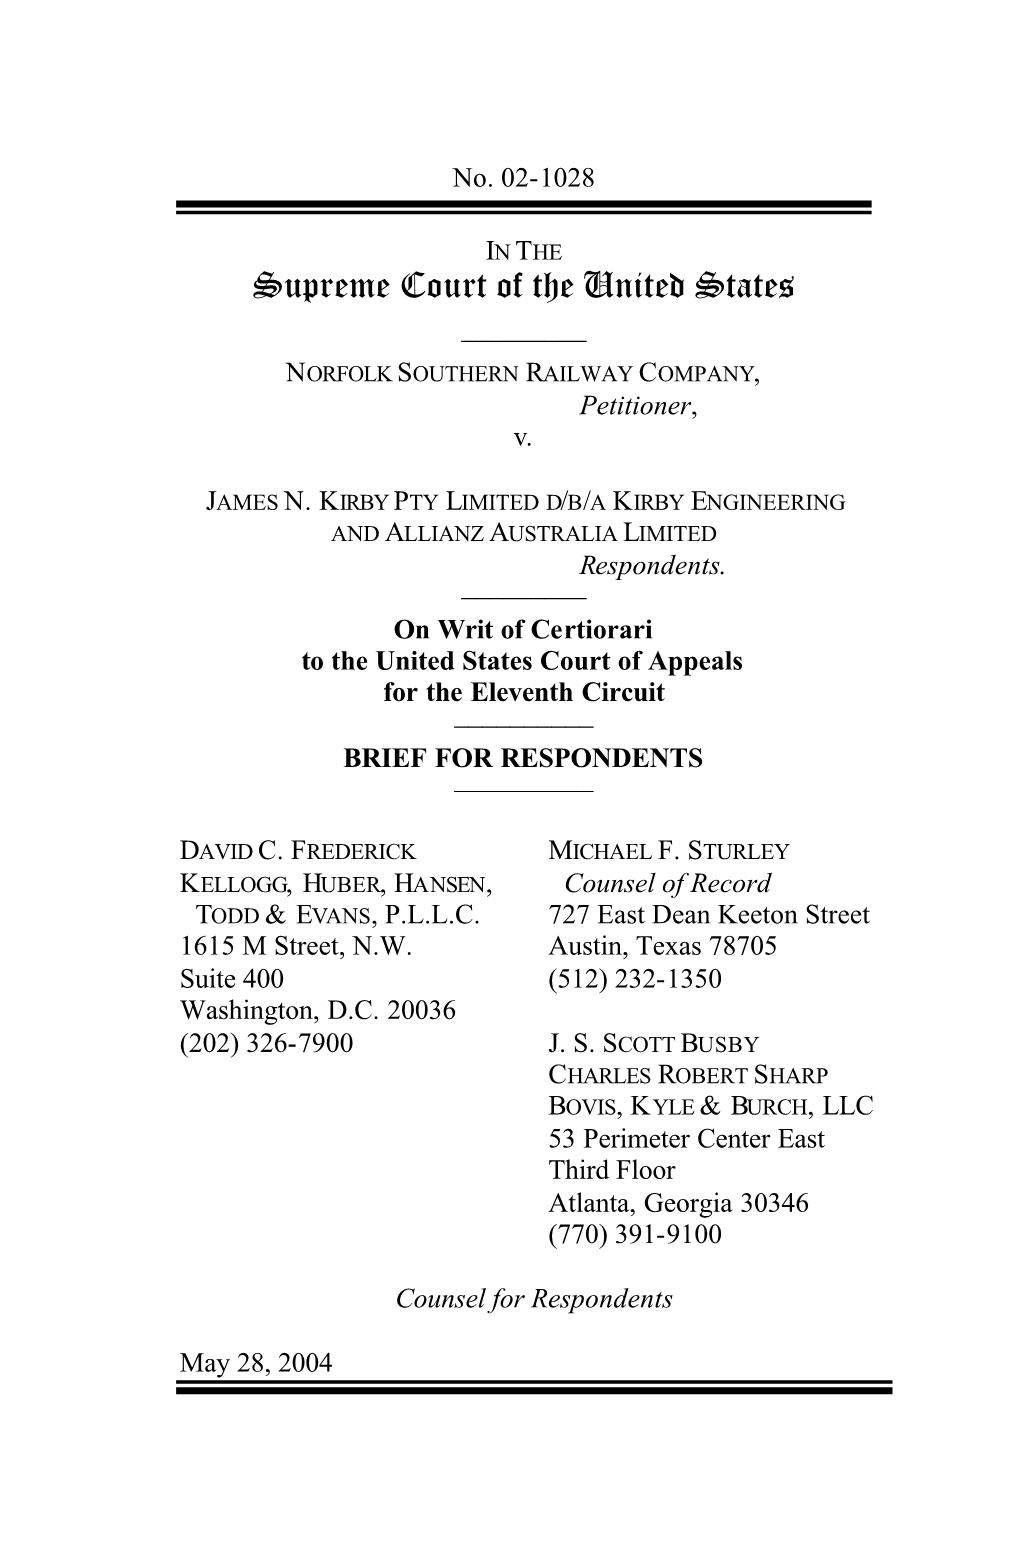 Respondents Brief in Norfolk Southern Railway Co. V. James N. Kirby